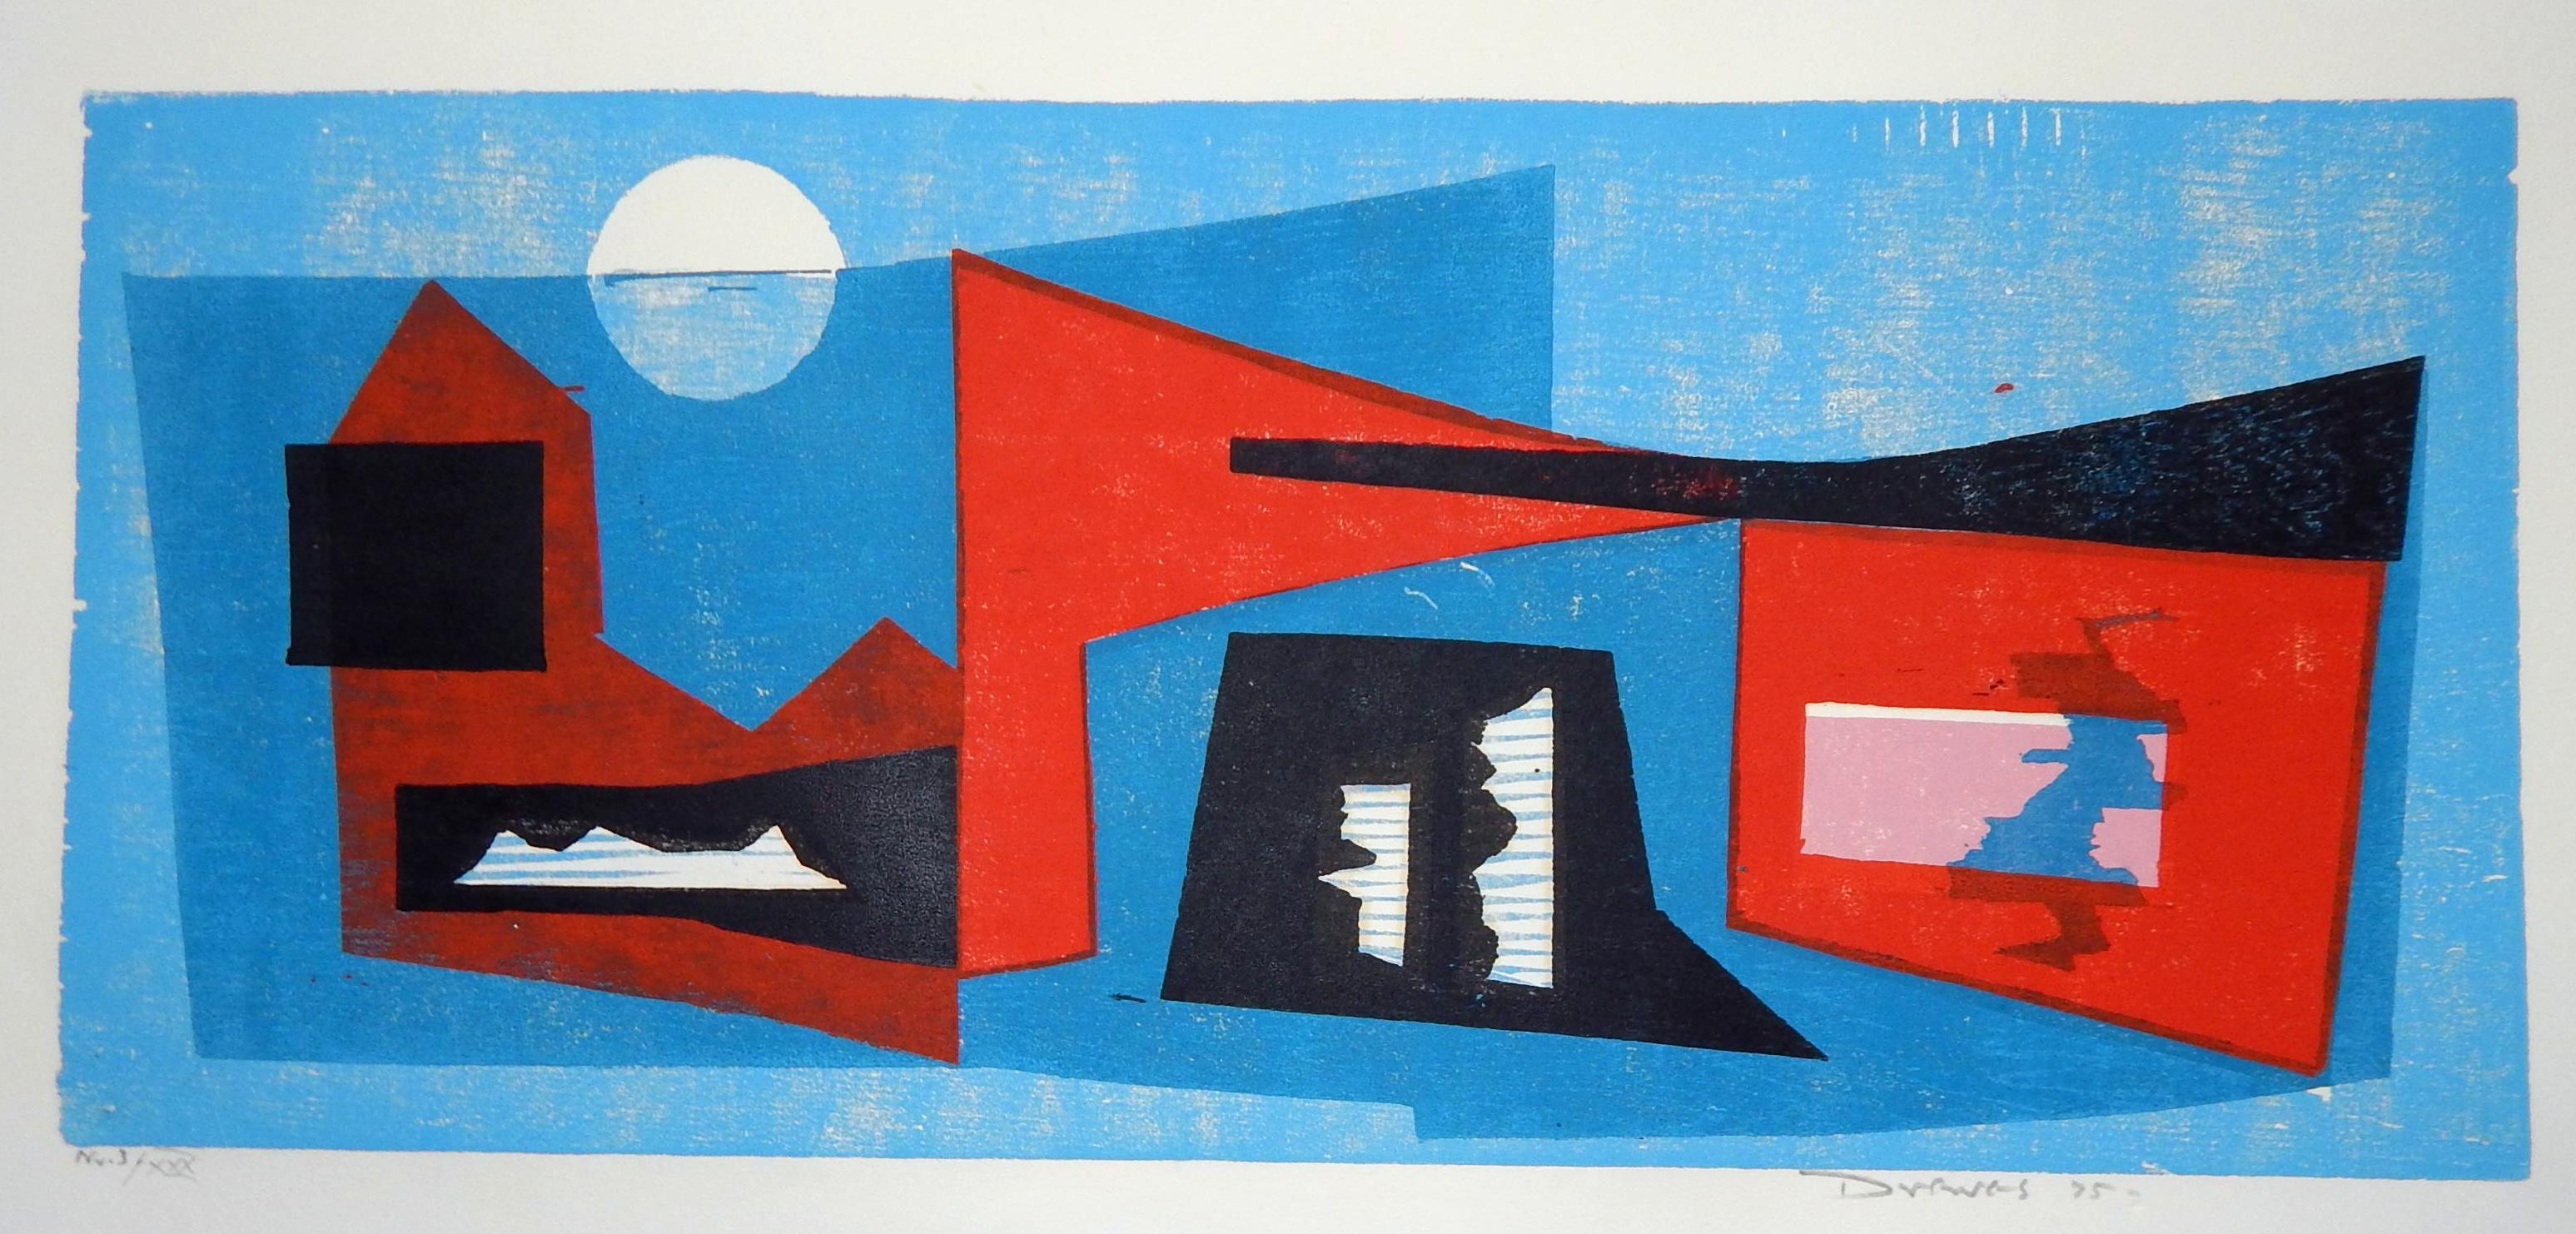 Original color woodblock print by Werner Drewes.
In excellent condition. Unframed.
Image measures 9 1/8 x 21 inches.
Pencil signed and dated lower right.
Edition size in pencil lower left: #3 of 30.
(13) R-341

Werner Drewes